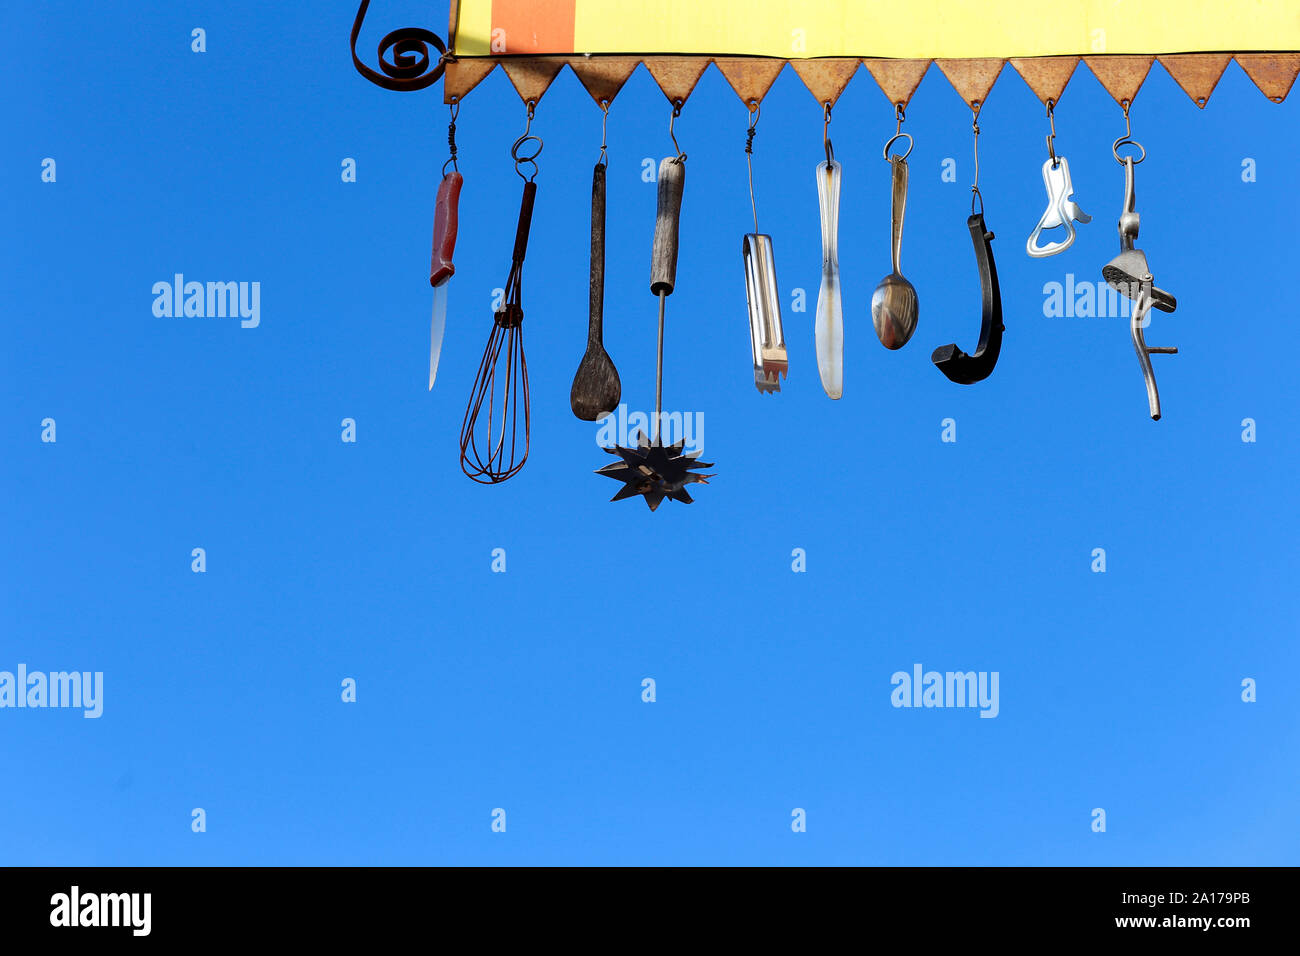 objects, utensils and cutlery hanging on yellow stand on blue background Stock Photo